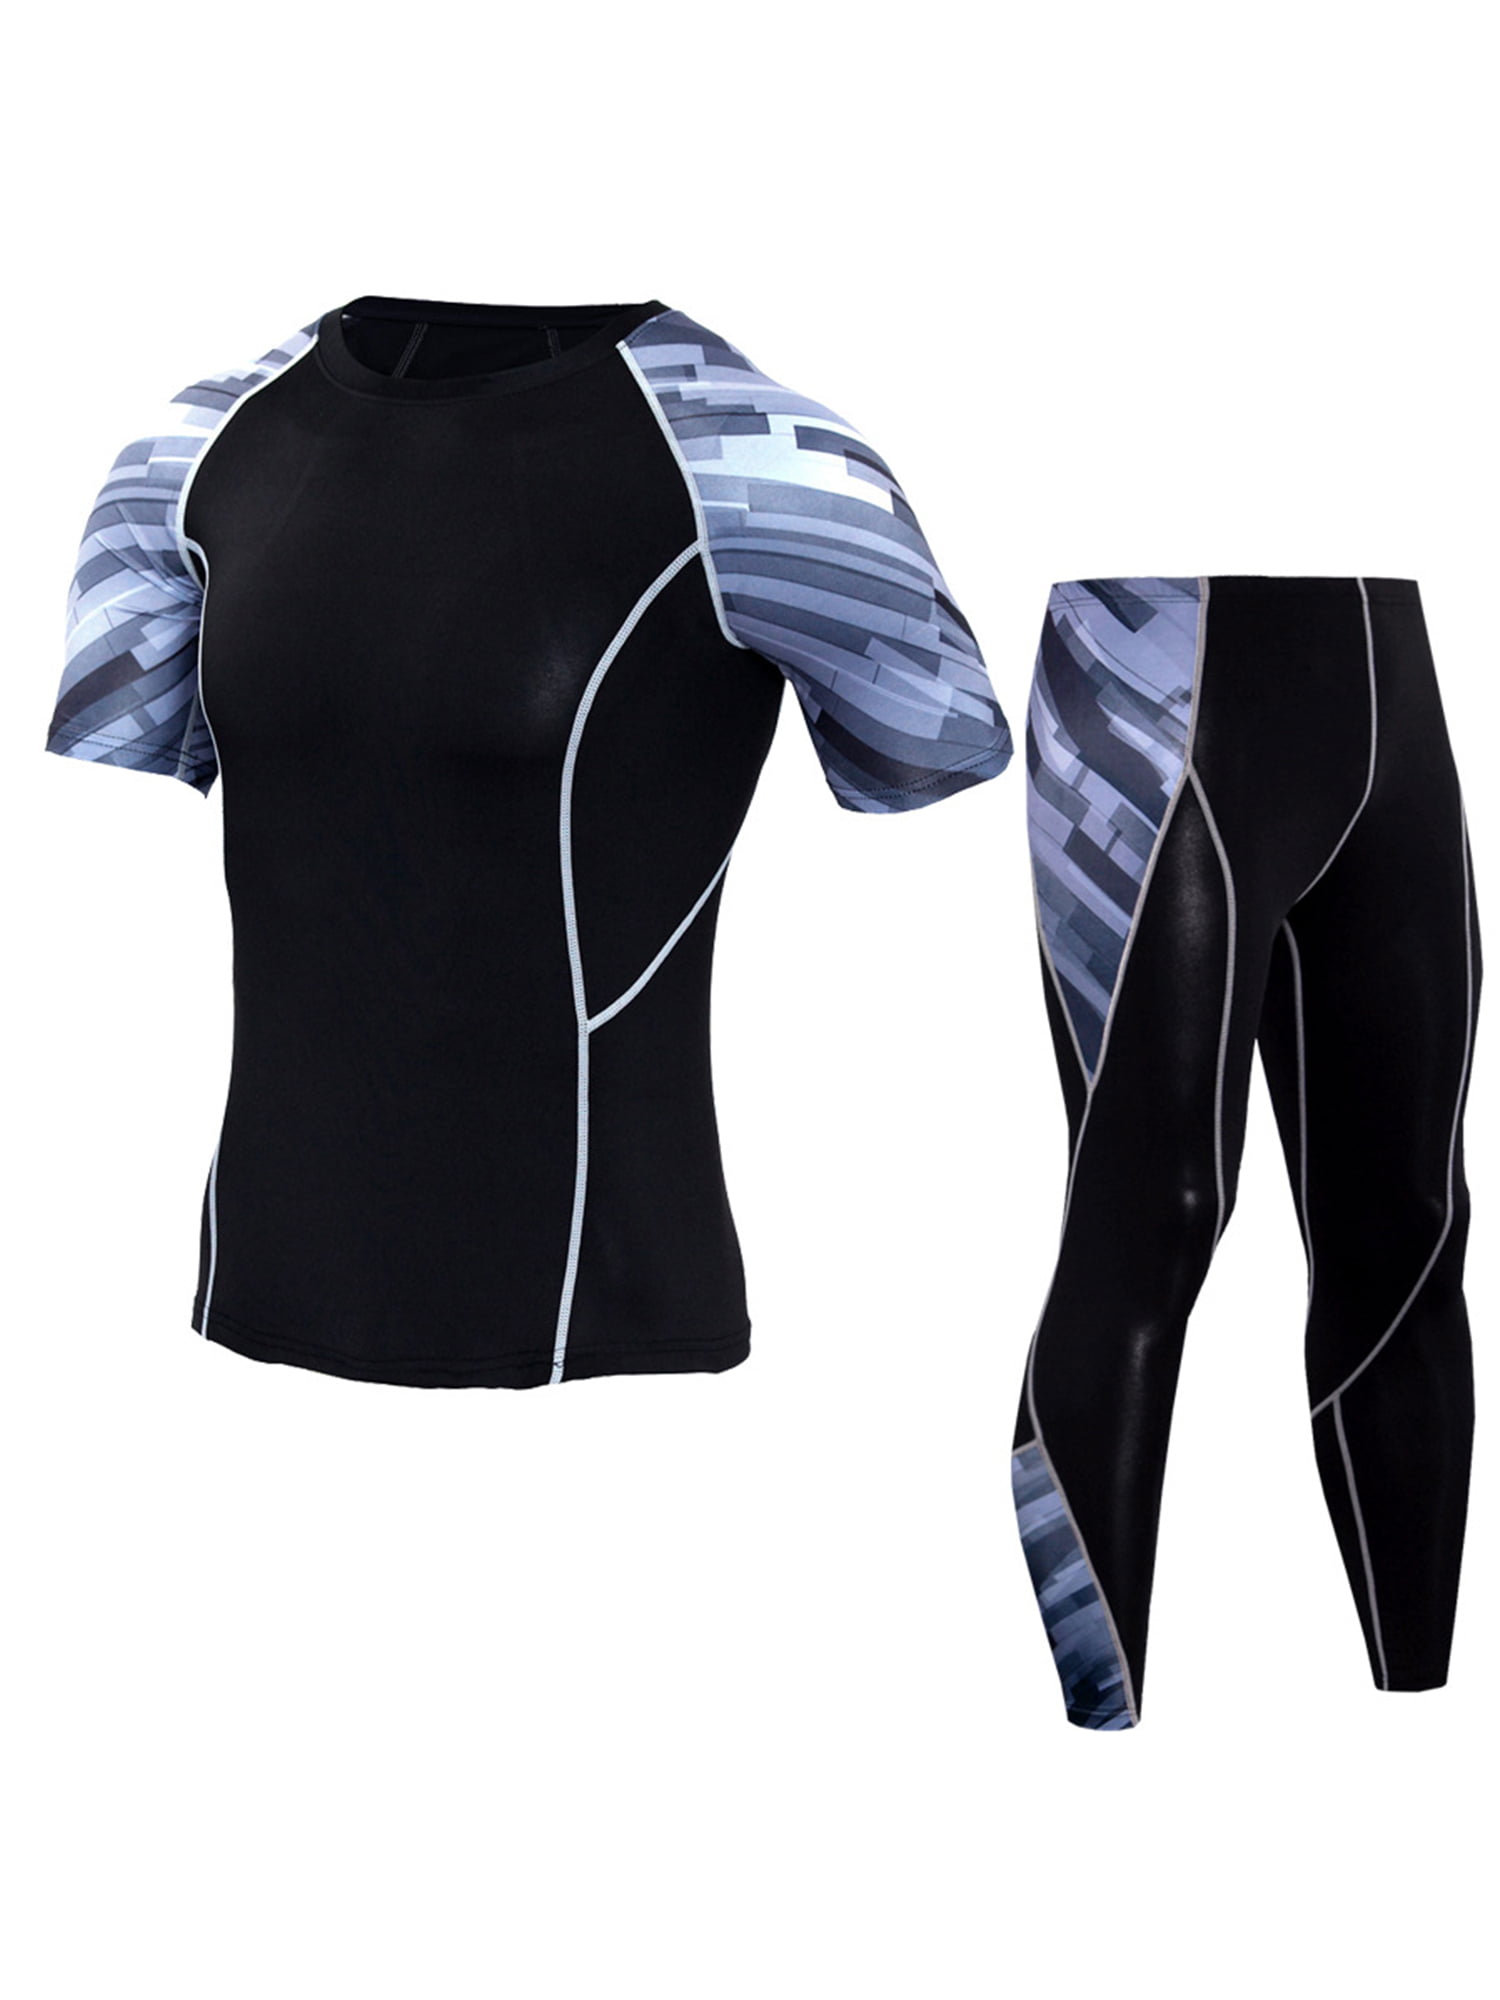 2019 New Compression Mens Sport Suits Quick Dry Running Sets 